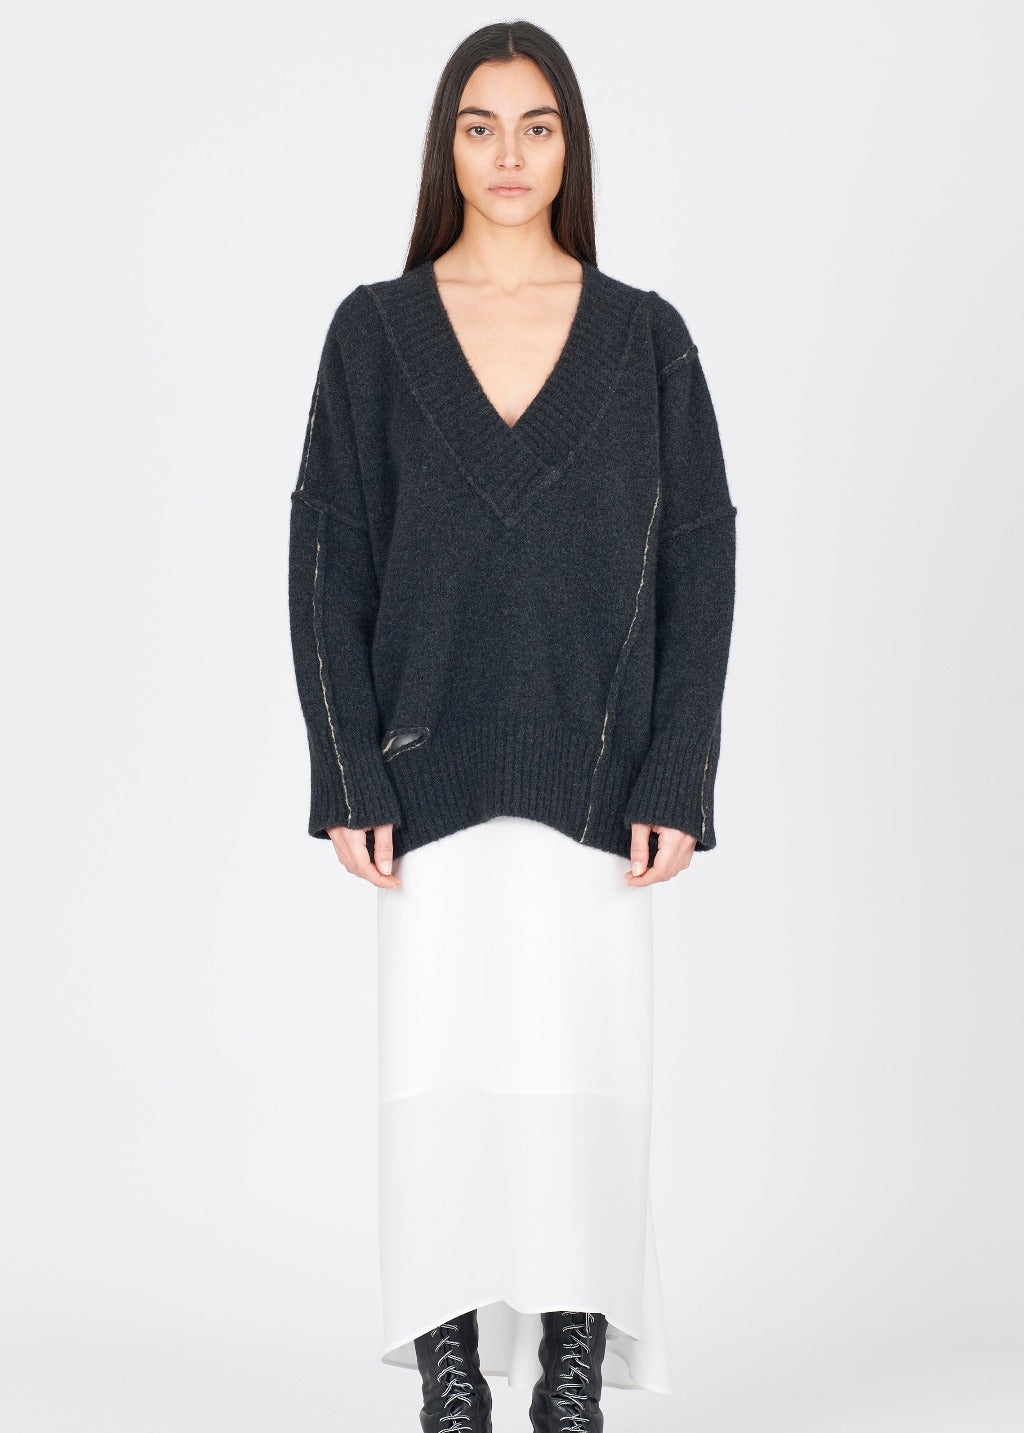 Isabel Benenato Yak V Neck Knit with Cut-Outs